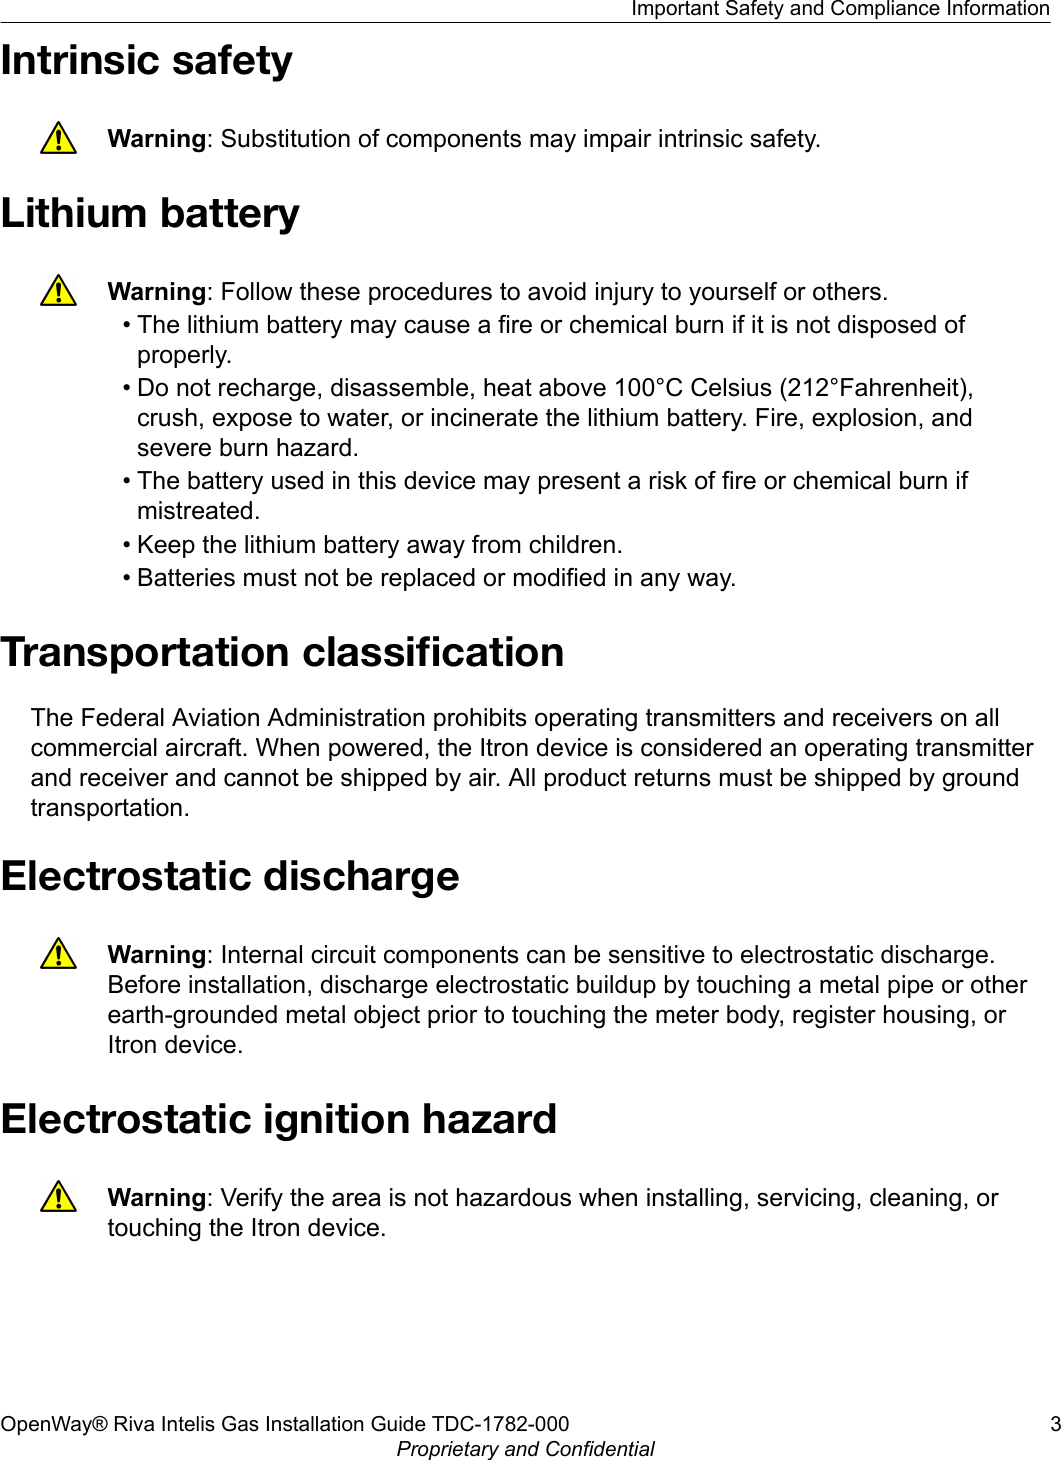 Intrinsic safetyWarning: Substitution of components may impair intrinsic safety.Lithium batteryWarning: Follow these procedures to avoid injury to yourself or others.• The lithium battery may cause a fire or chemical burn if it is not disposed ofproperly.• Do not recharge, disassemble, heat above 100°C Celsius (212°Fahrenheit),crush, expose to water, or incinerate the lithium battery. Fire, explosion, andsevere burn hazard.• The battery used in this device may present a risk of fire or chemical burn ifmistreated.• Keep the lithium battery away from children.• Batteries must not be replaced or modified in any way.Transportation classiﬁcationThe Federal Aviation Administration prohibits operating transmitters and receivers on allcommercial aircraft. When powered, the Itron device is considered an operating transmitterand receiver and cannot be shipped by air. All product returns must be shipped by groundtransportation.Electrostatic dischargeWarning: Internal circuit components can be sensitive to electrostatic discharge.Before installation, discharge electrostatic buildup by touching a metal pipe or otherearth-grounded metal object prior to touching the meter body, register housing, orItron device.Electrostatic ignition hazardWarning: Verify the area is not hazardous when installing, servicing, cleaning, ortouching the Itron device.Important Safety and Compliance InformationOpenWay® Riva Intelis Gas Installation Guide TDC-1782-000 3Proprietary and Confidential